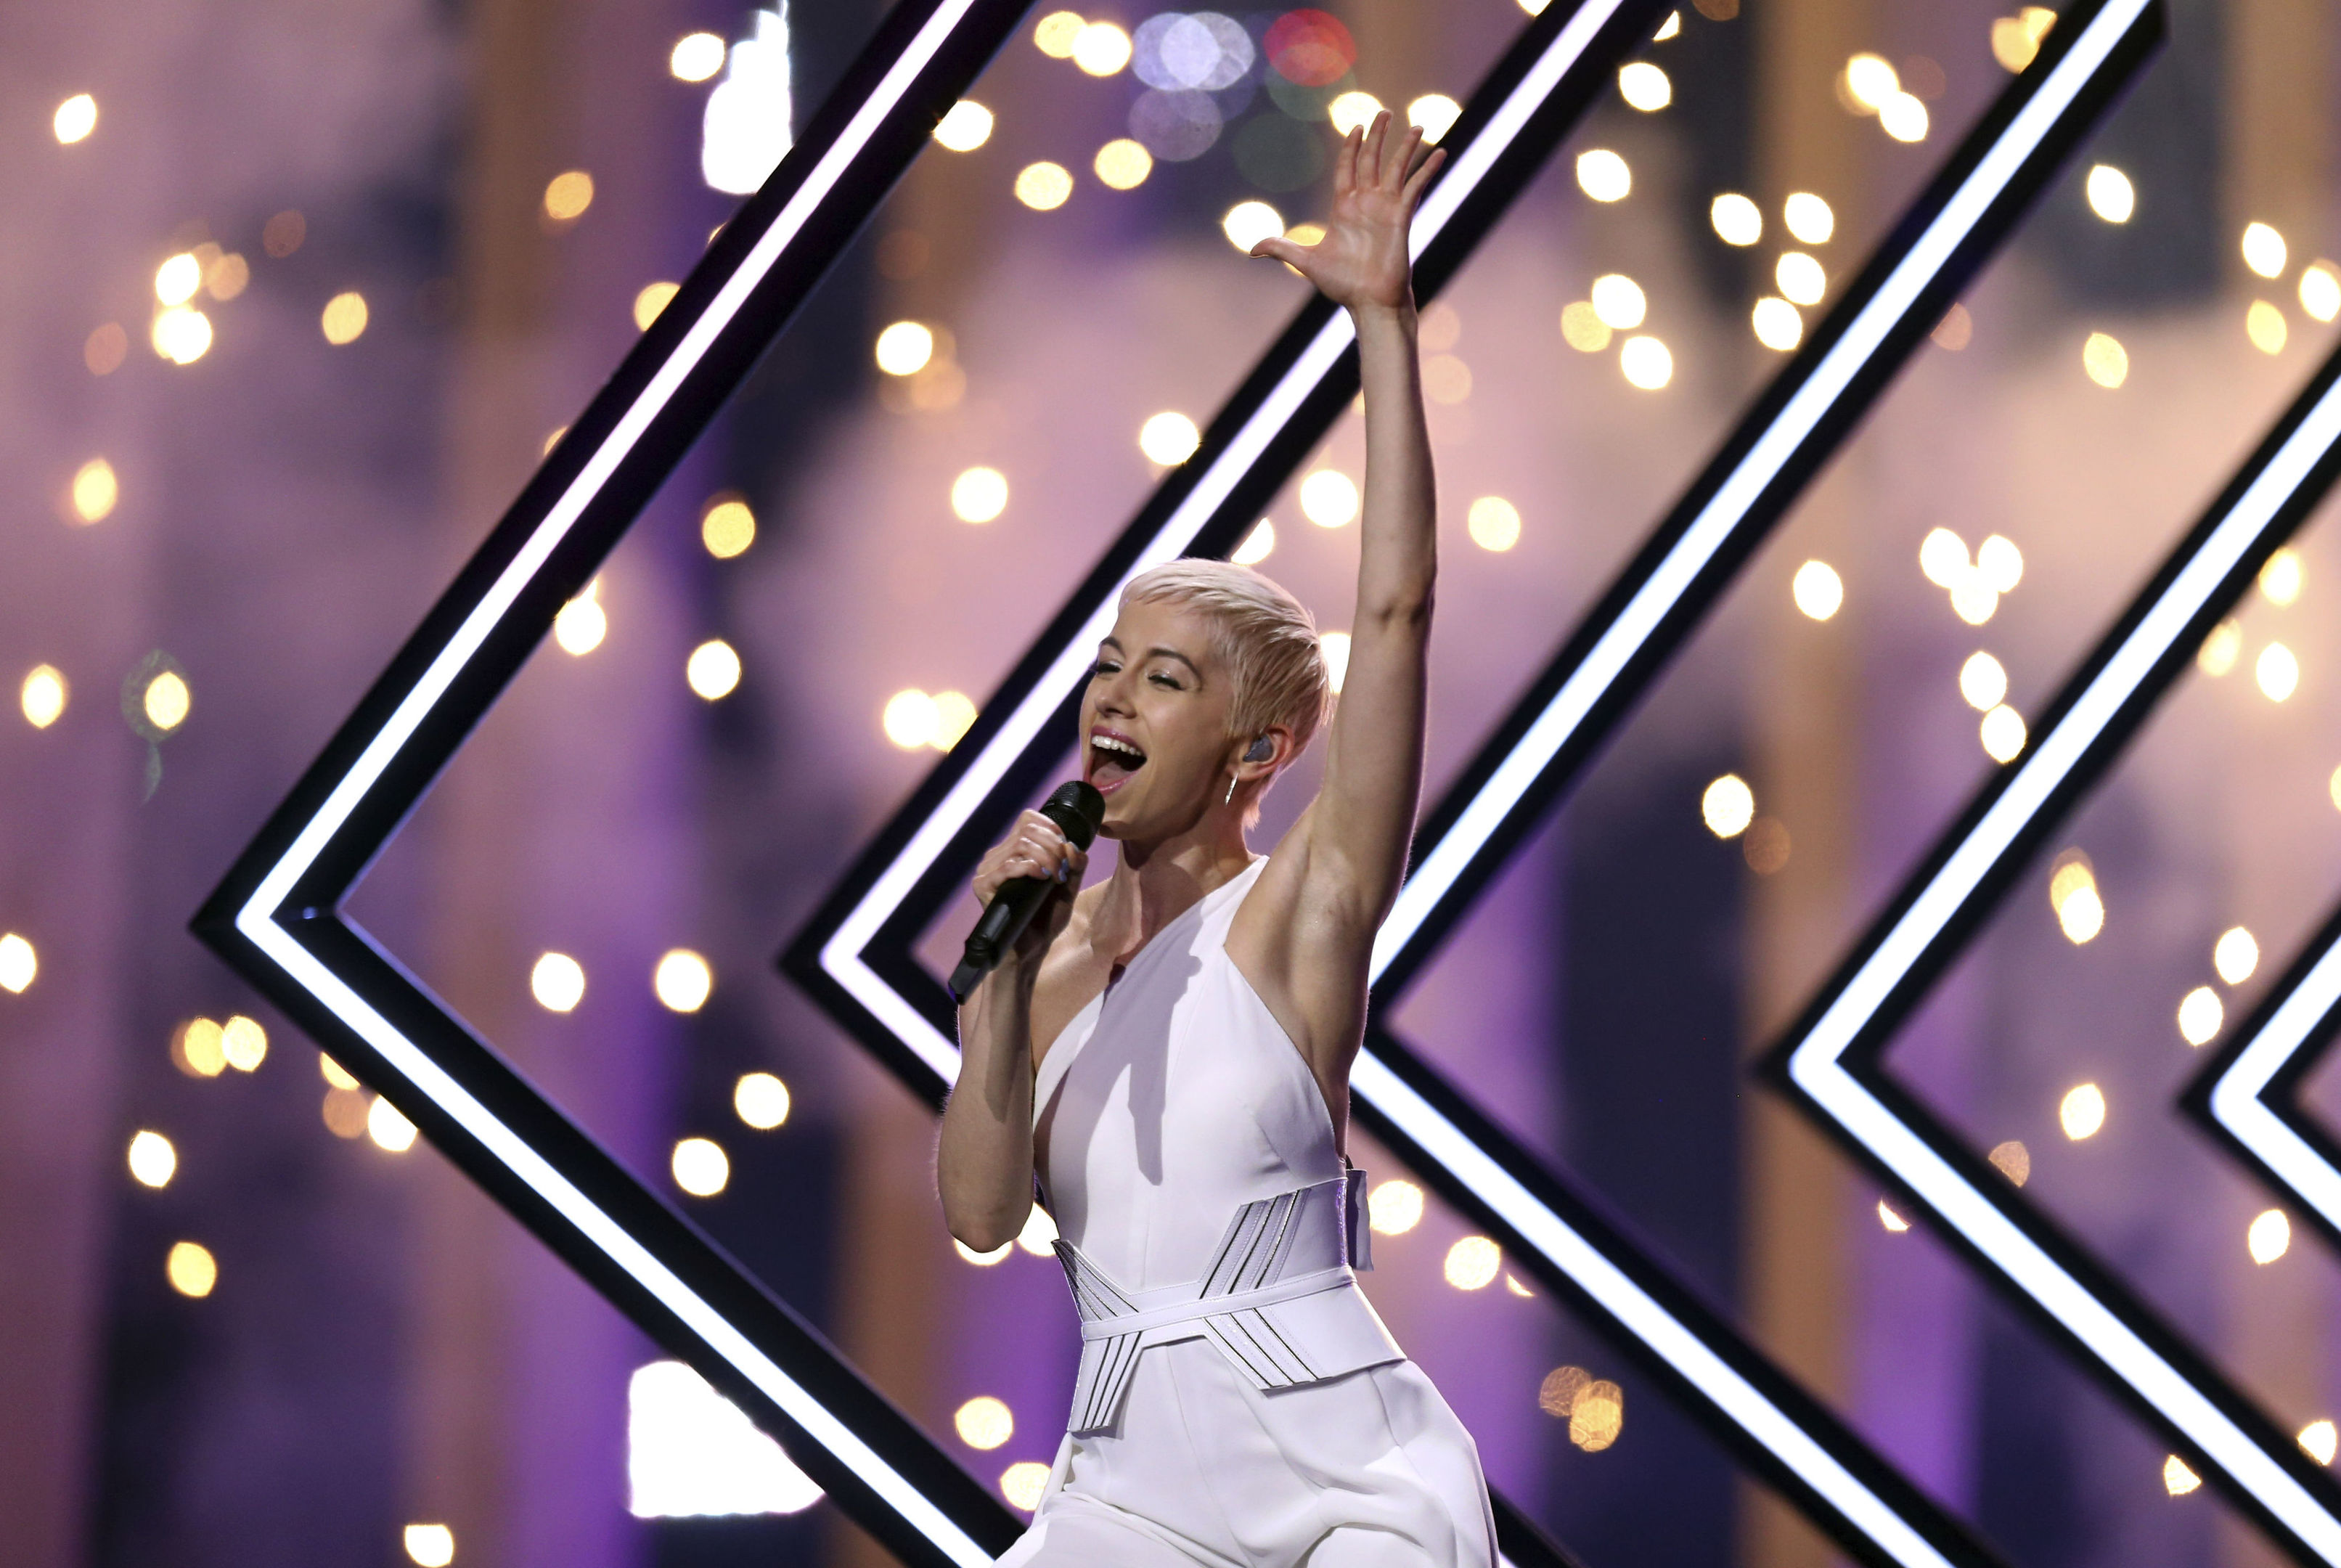 The UK's 2018 entrant SuRie during a dress rehearsal for the Eurovision Song Contest (AP Photo/Armando Franca)